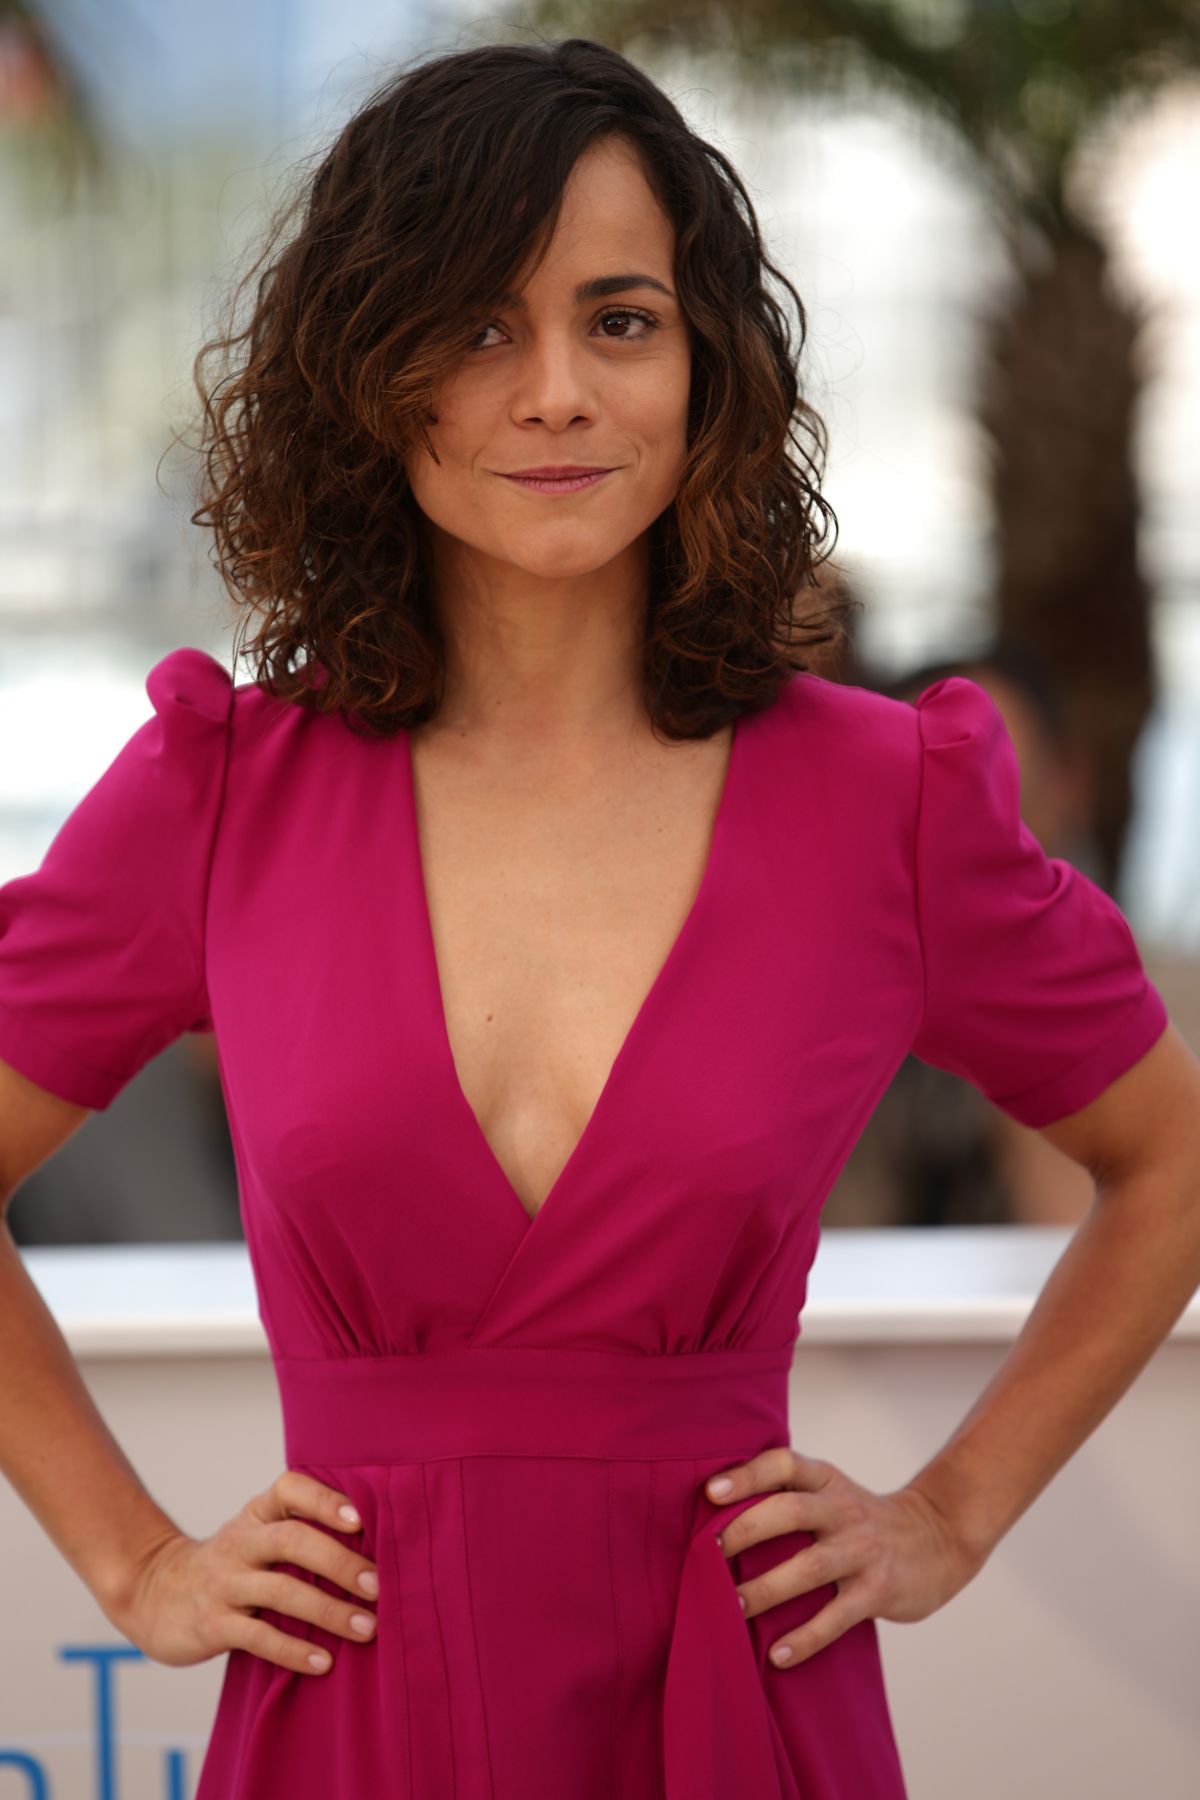 Alice Braga Backgrounds, Compatible - PC, Mobile, Gadgets| 1200x1800 px